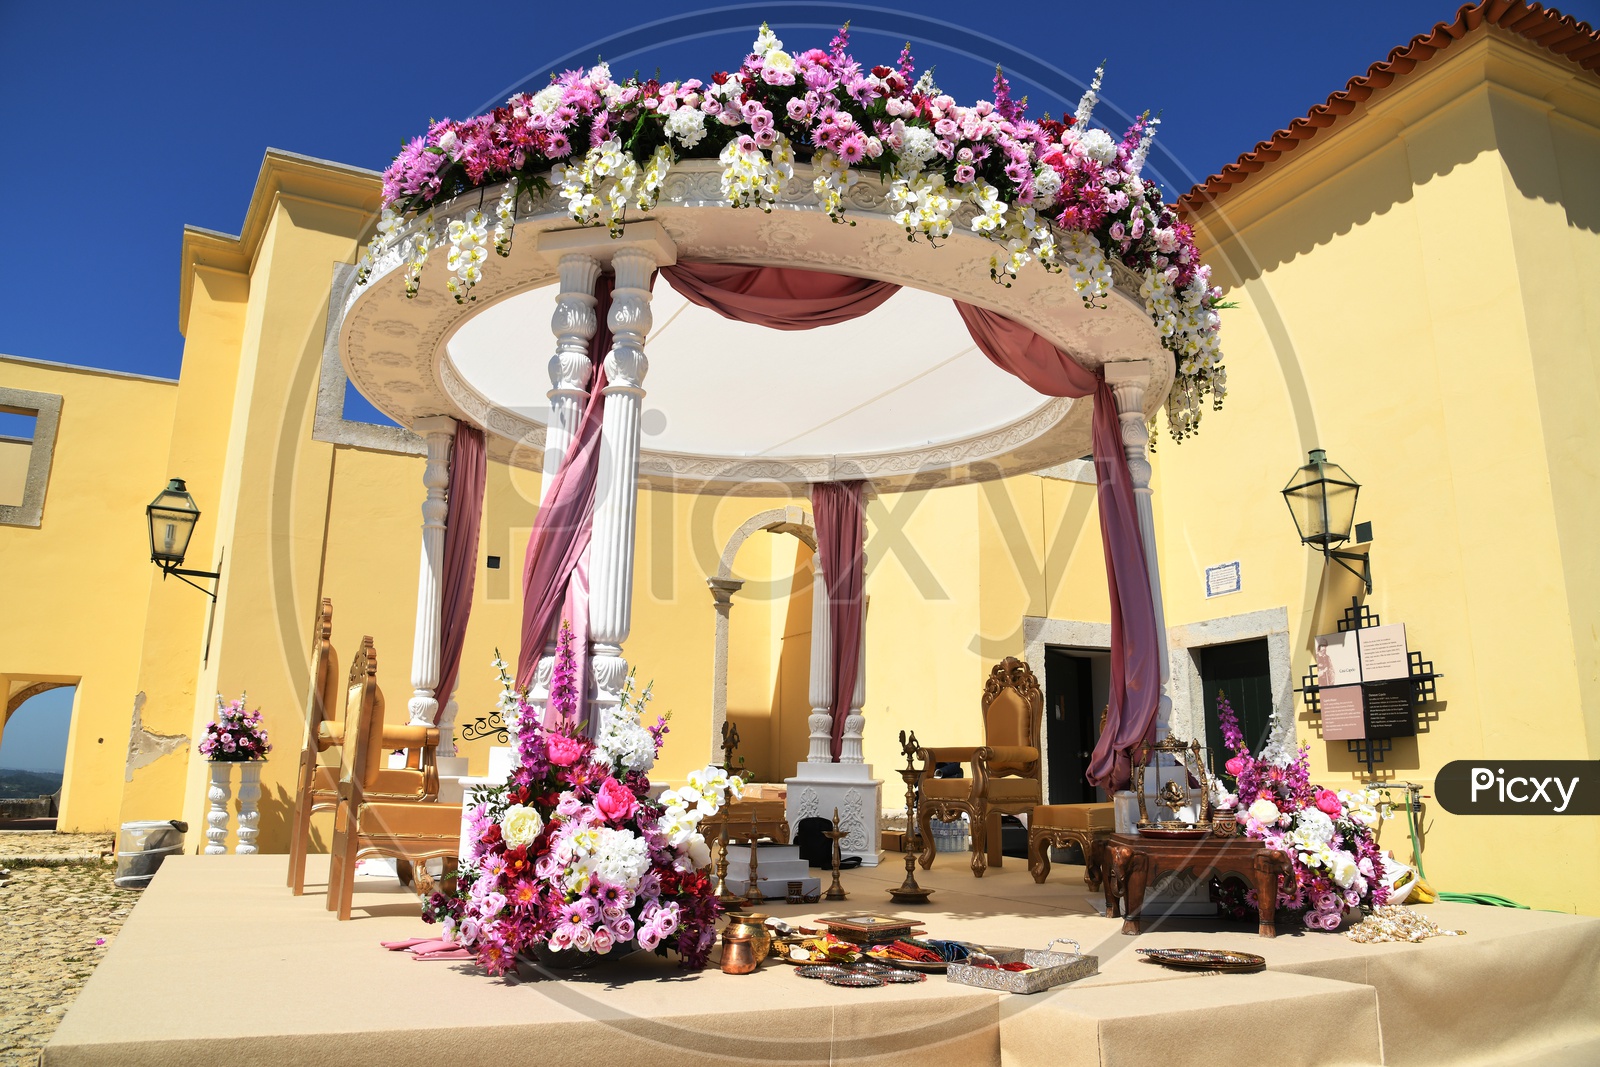 Flower Decoration With Beautiful Flowers At an Event